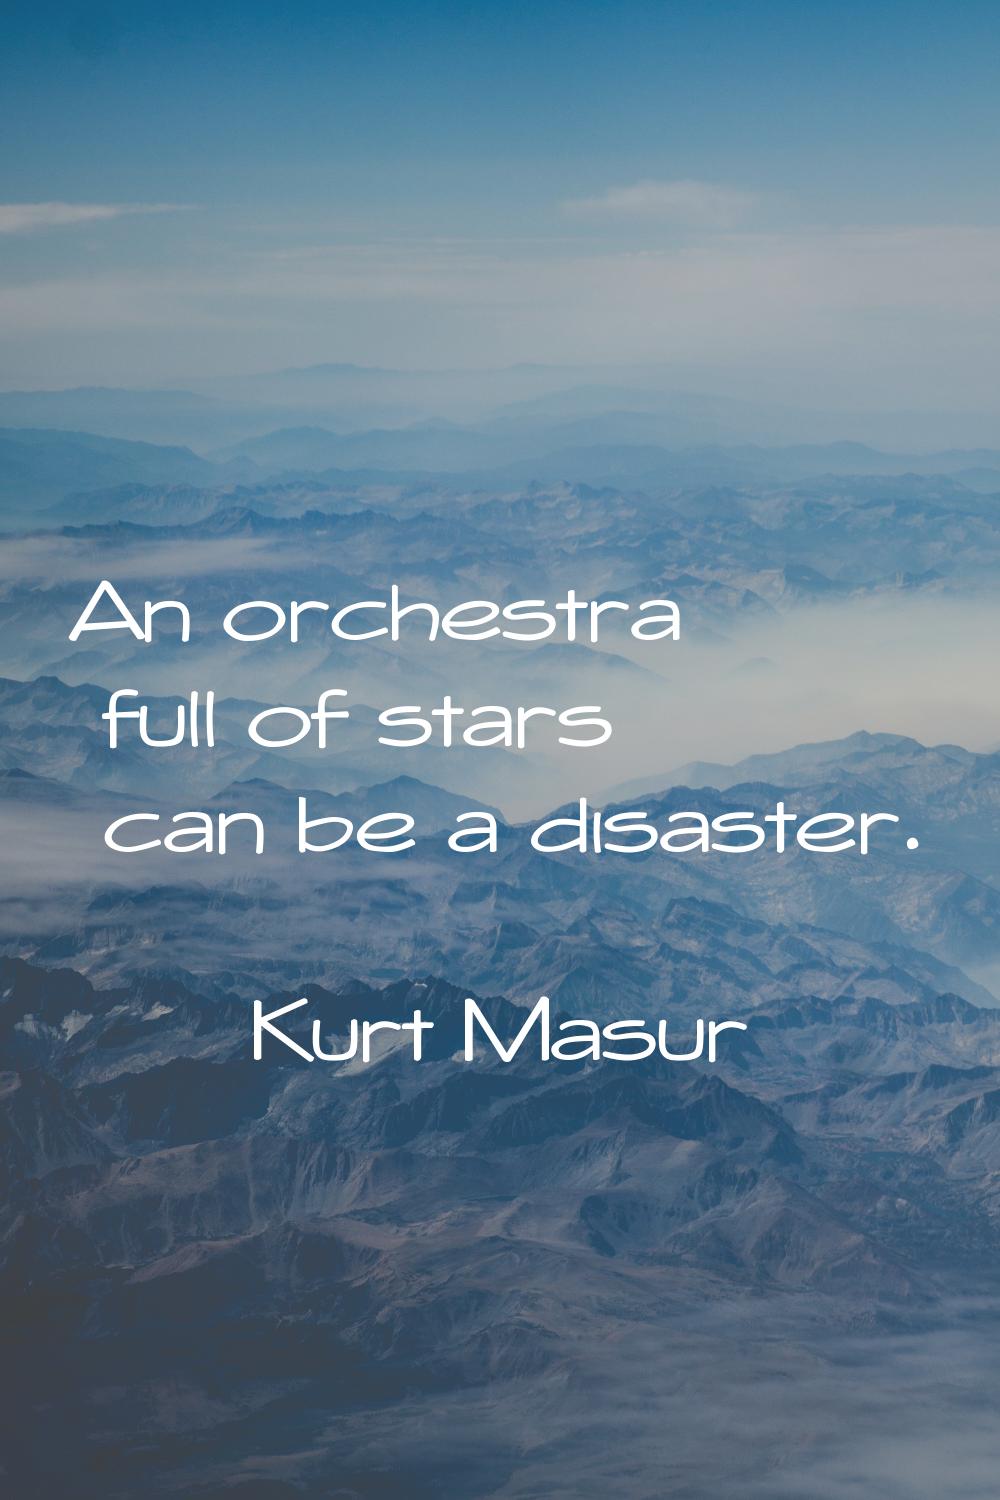 An orchestra full of stars can be a disaster.